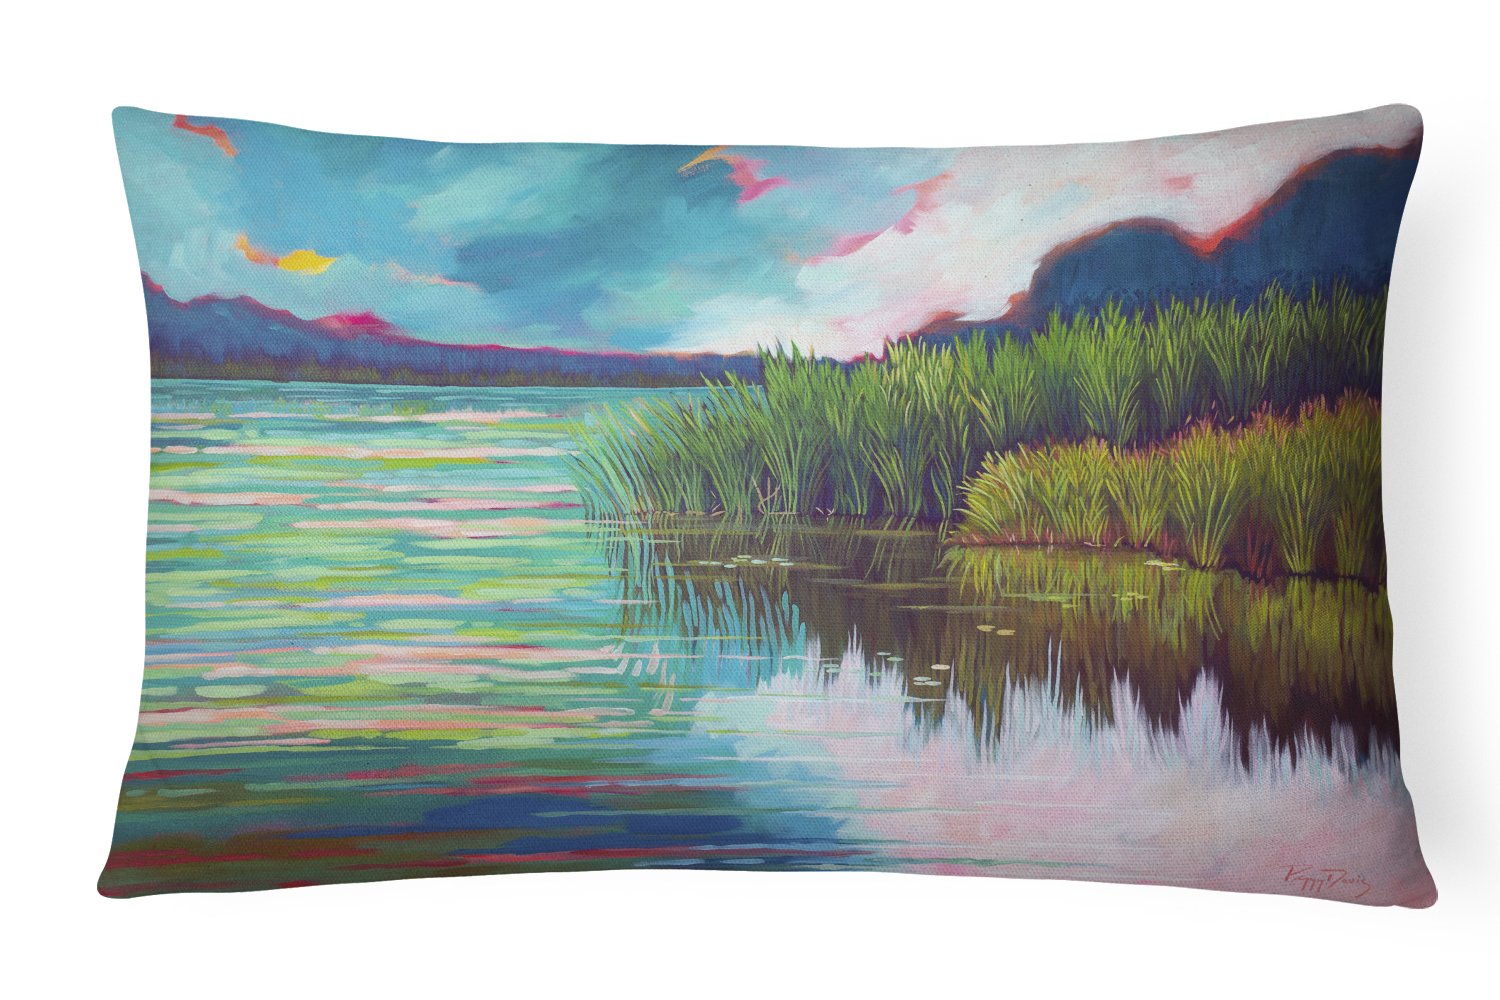 Moved upon the Water Canvas Fabric Decorative Pillow PPD3018PW1216 by Caroline's Treasures